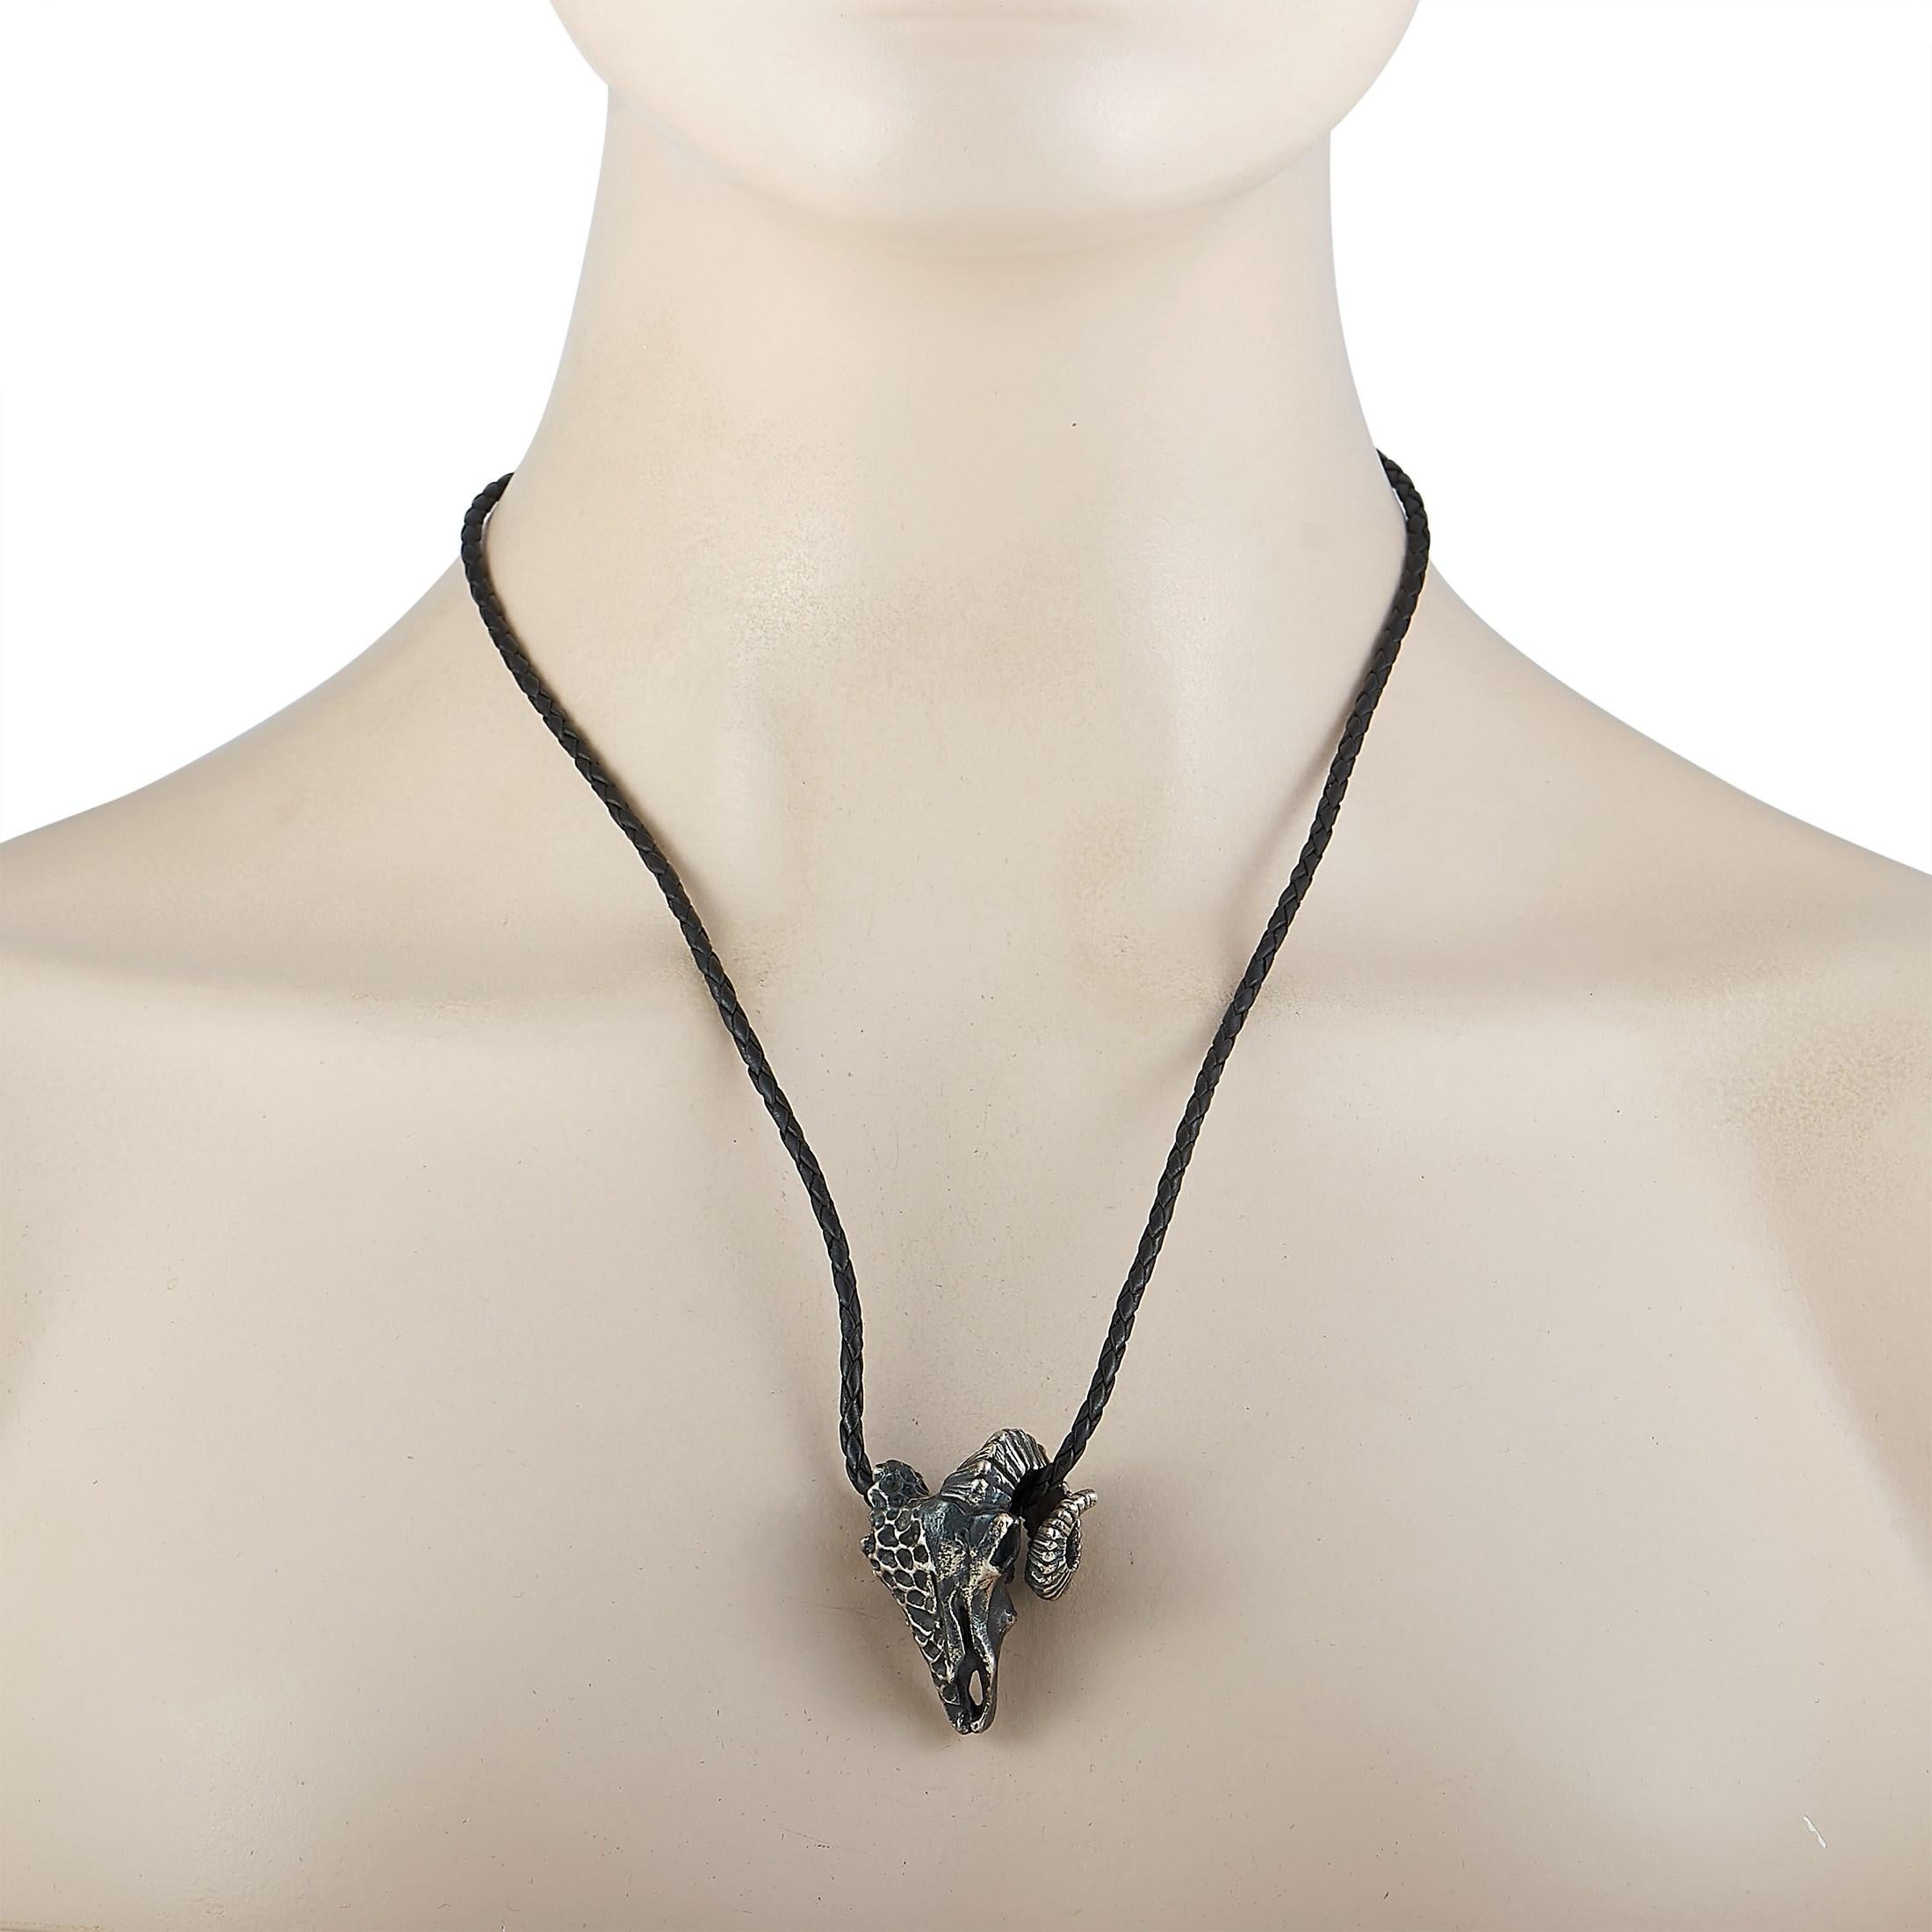 This King Baby necklace is presented with a 22” black cord onto which a silver ram skull pendant is attached, measuring 1.50” in length and 1.12” in width. The necklace weighs 33.3 grams.

Offered in brand-new condition, this jewelry piece includes